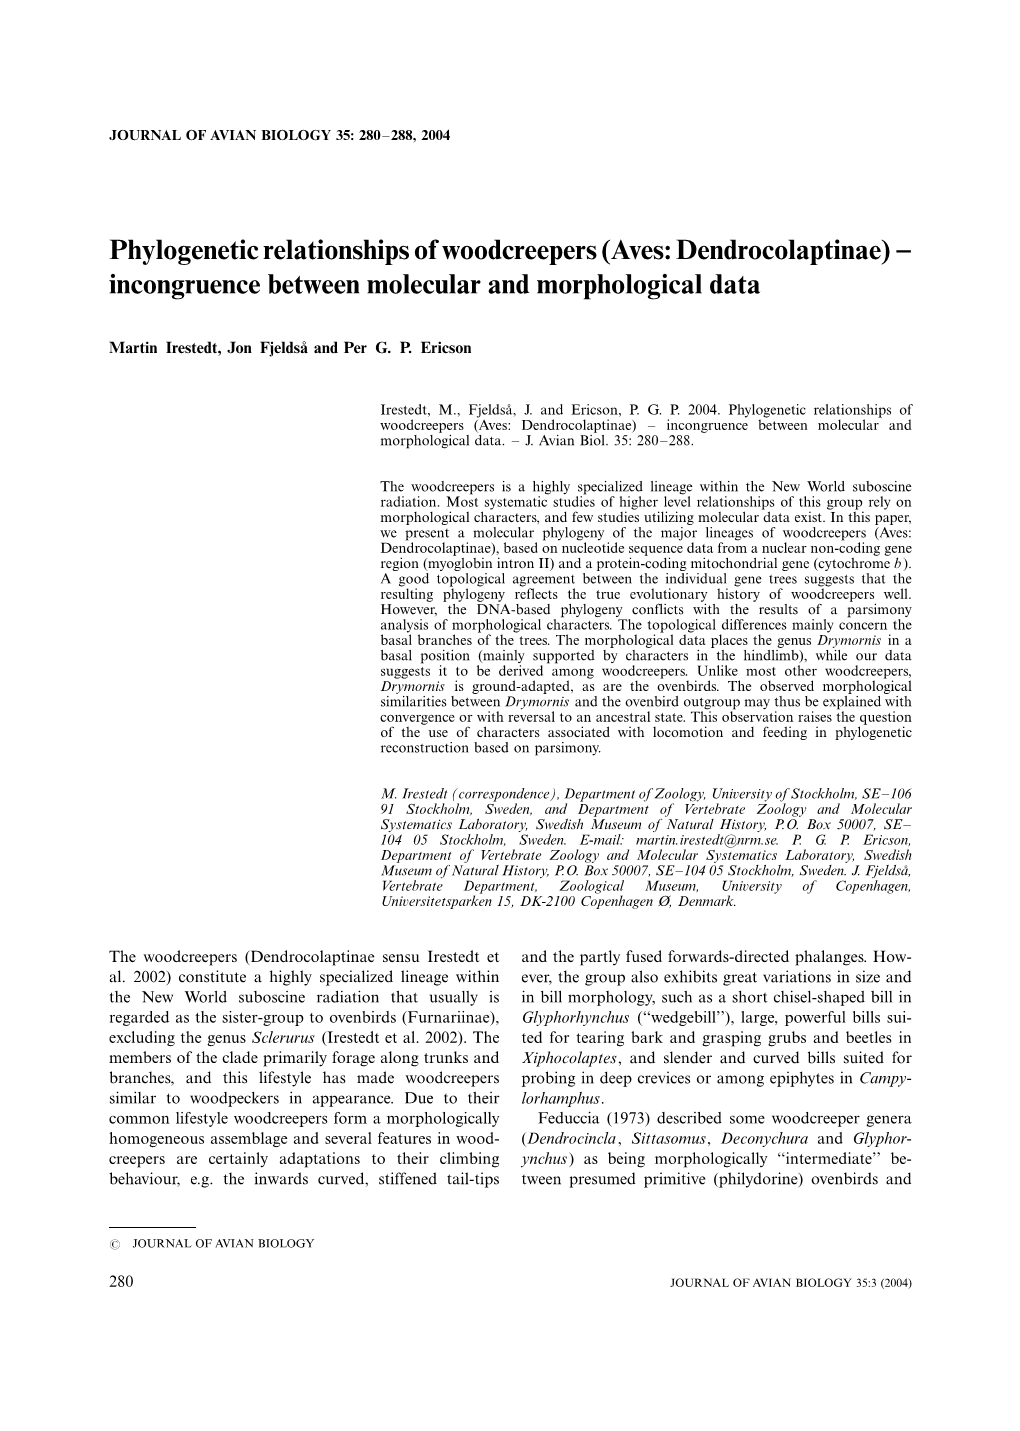 Phylogenetic Relationships of Woodcreepers (Aves: Dendrocolaptinae) Б/ Incongruence Between Molecular and Morphological Data